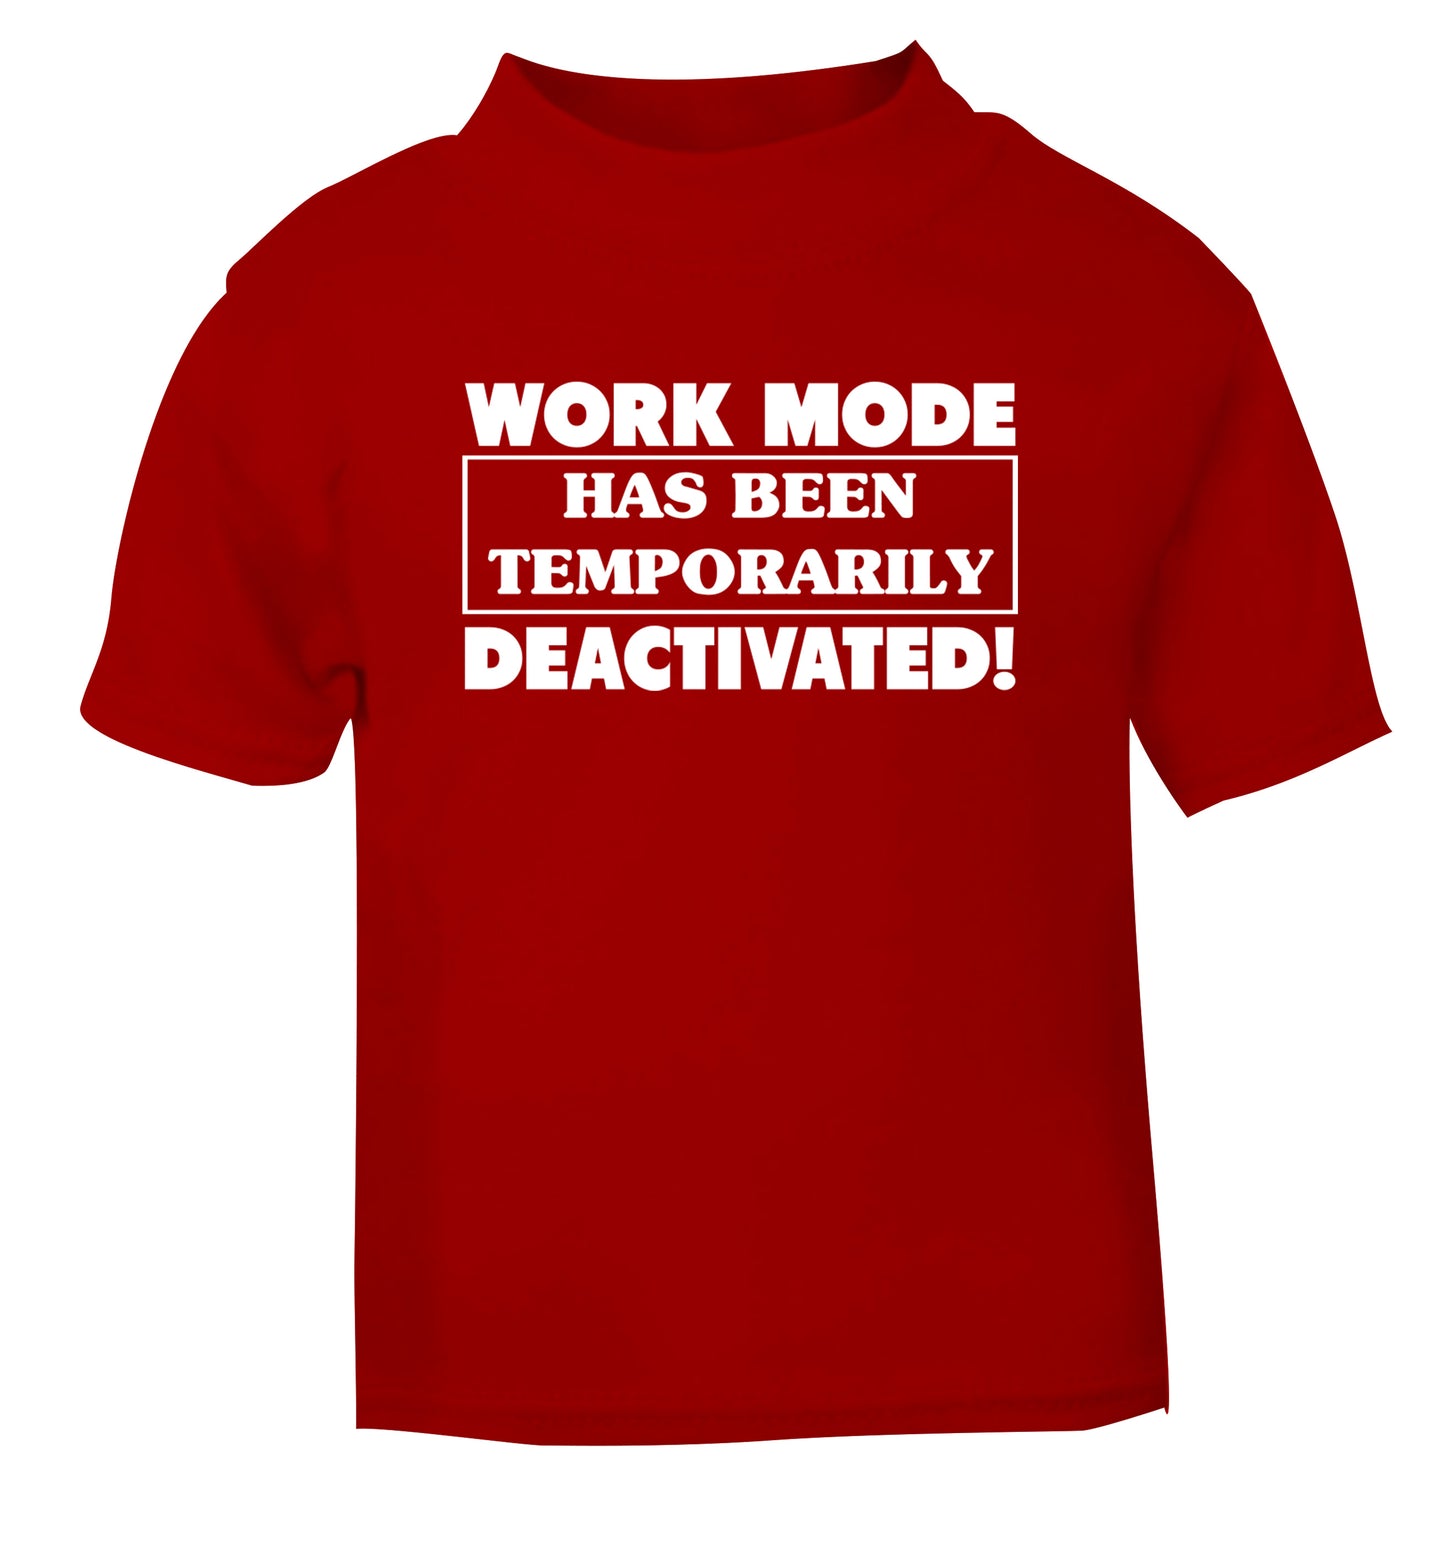 Work mode has now been temporarily deactivated red Baby Toddler Tshirt 2 Years